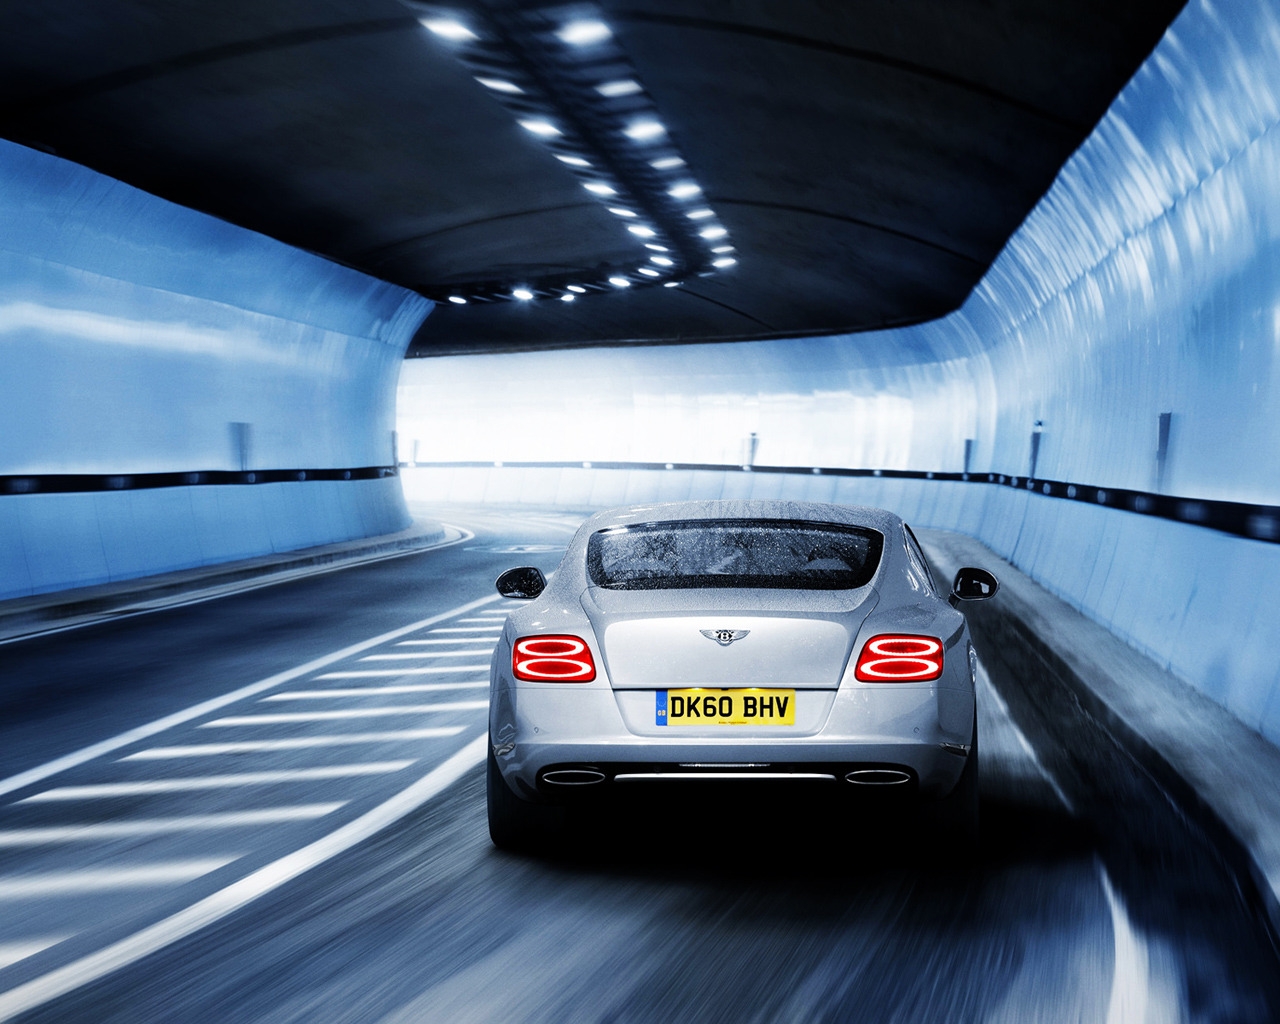 2011 Bentley Continental GT Rear for 1280 x 1024 resolution